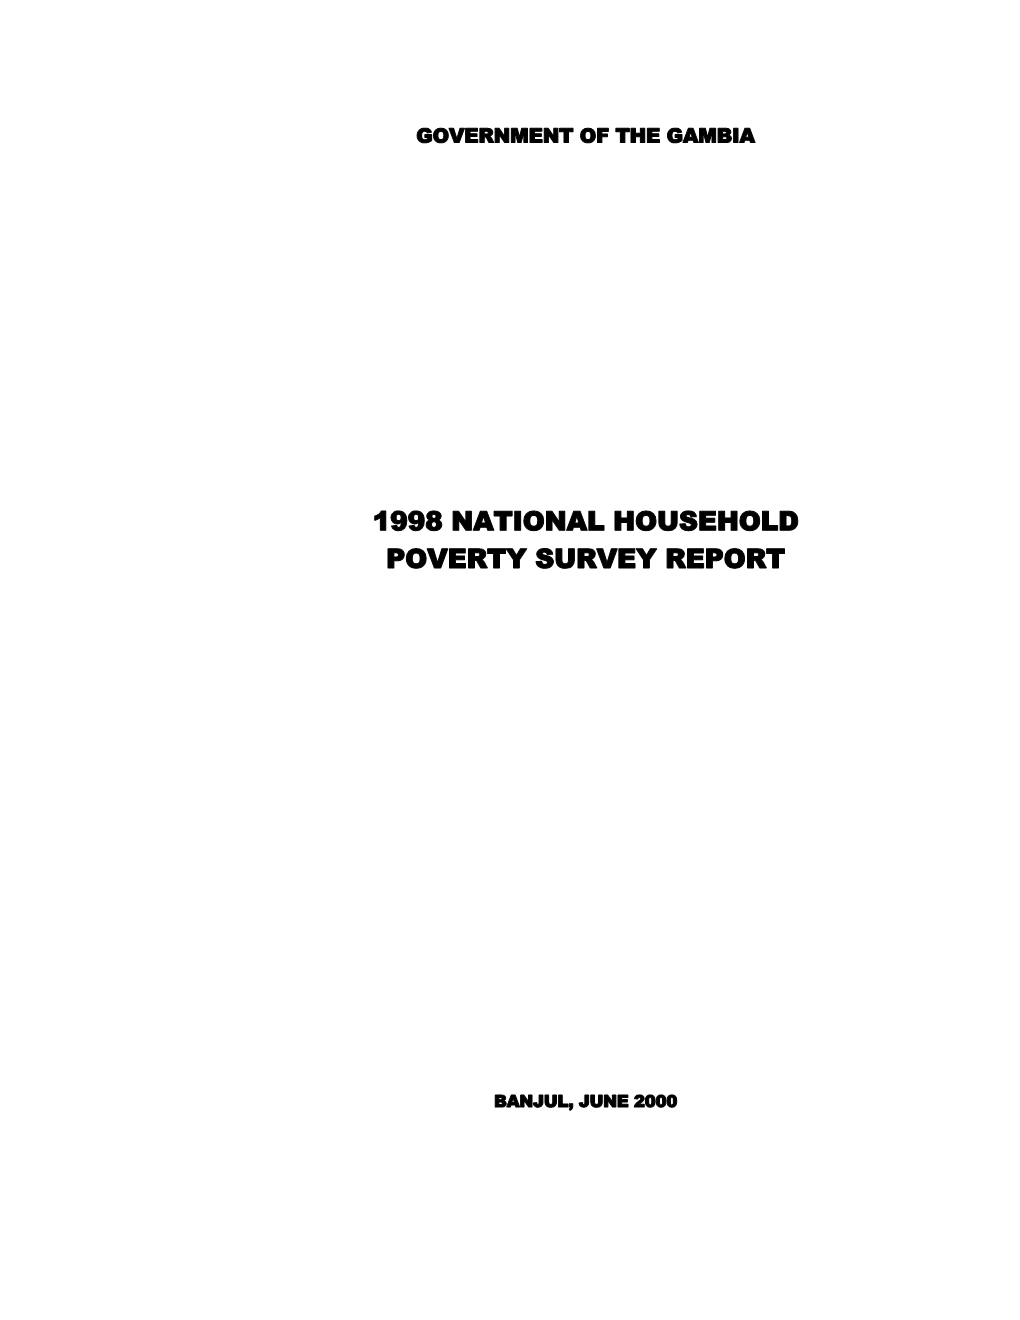 1998 National Household Poverty Survey Report